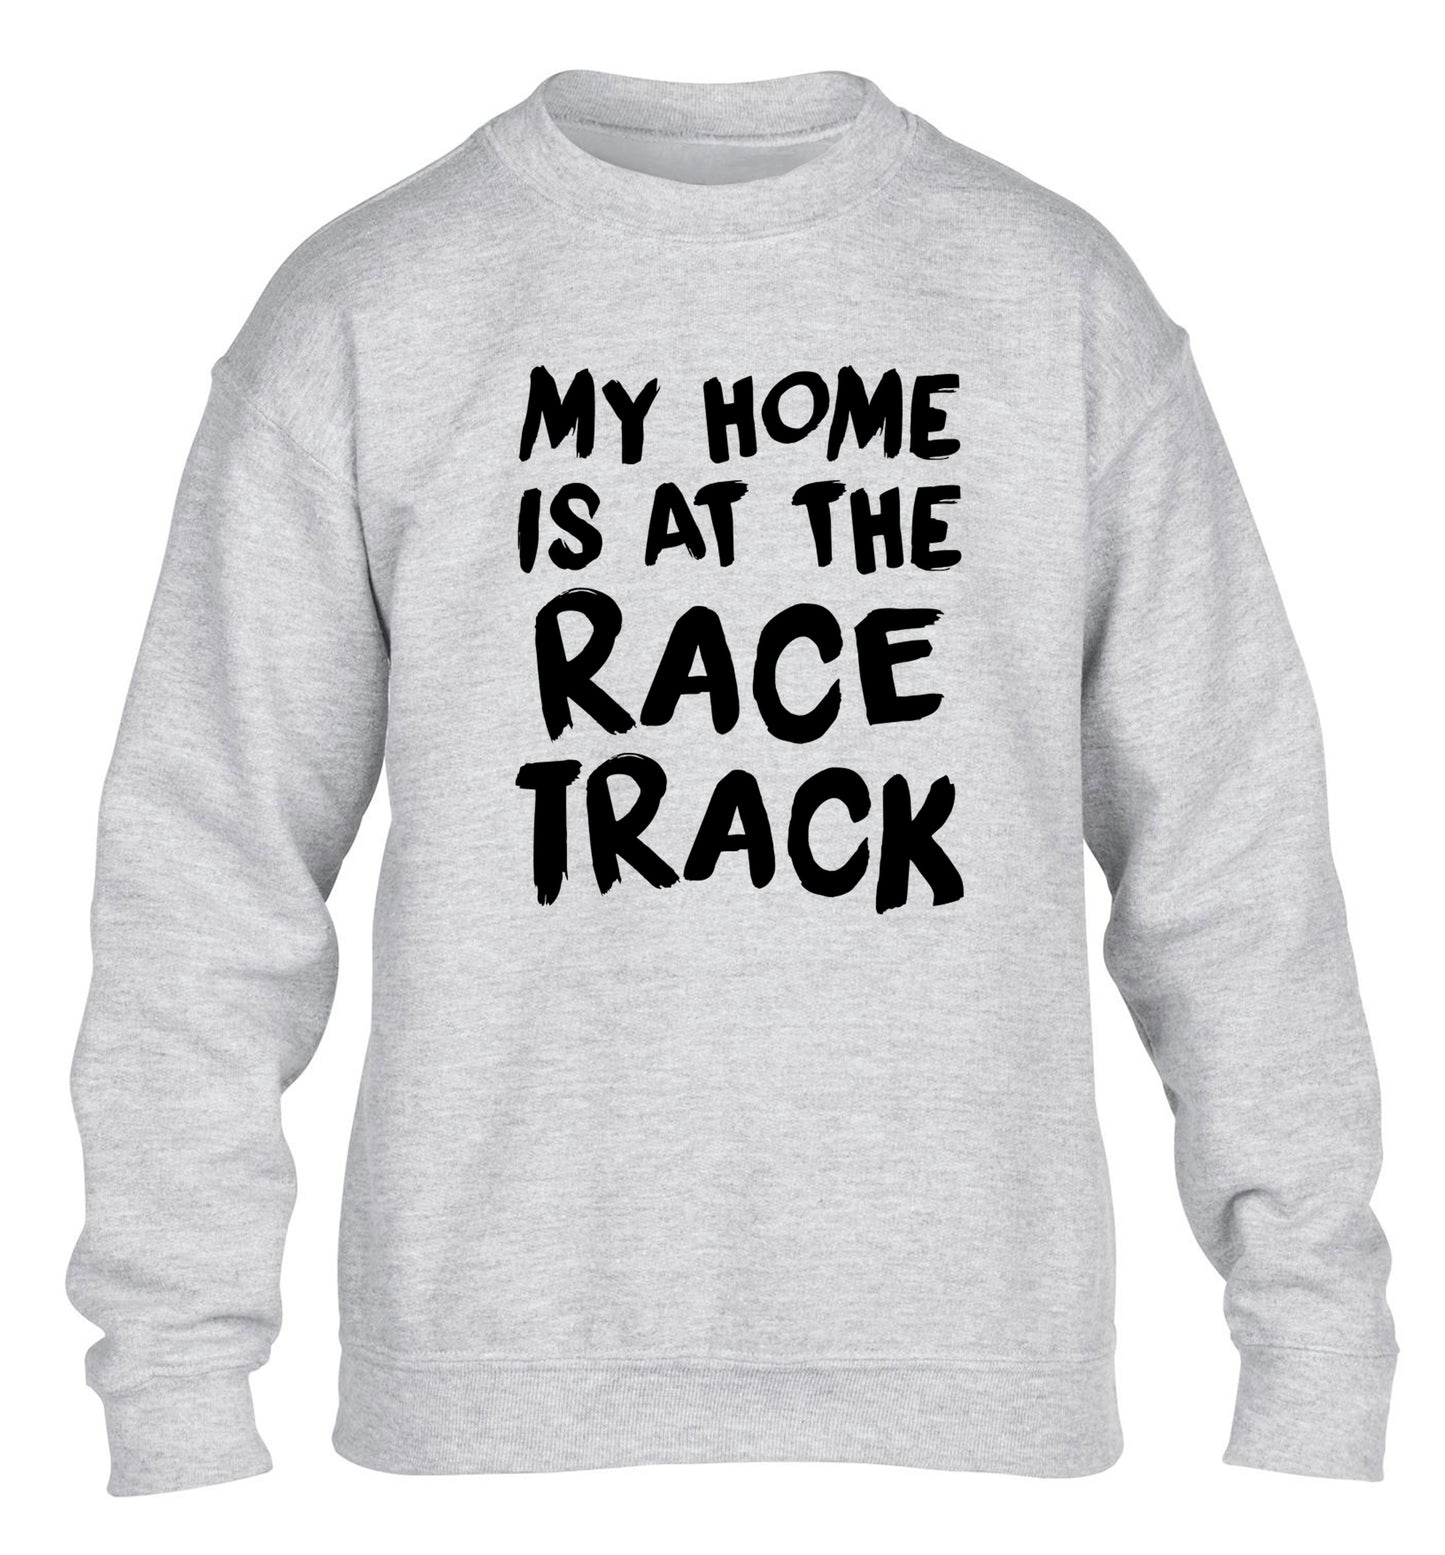 My home is at the race track children's grey sweater 12-14 Years